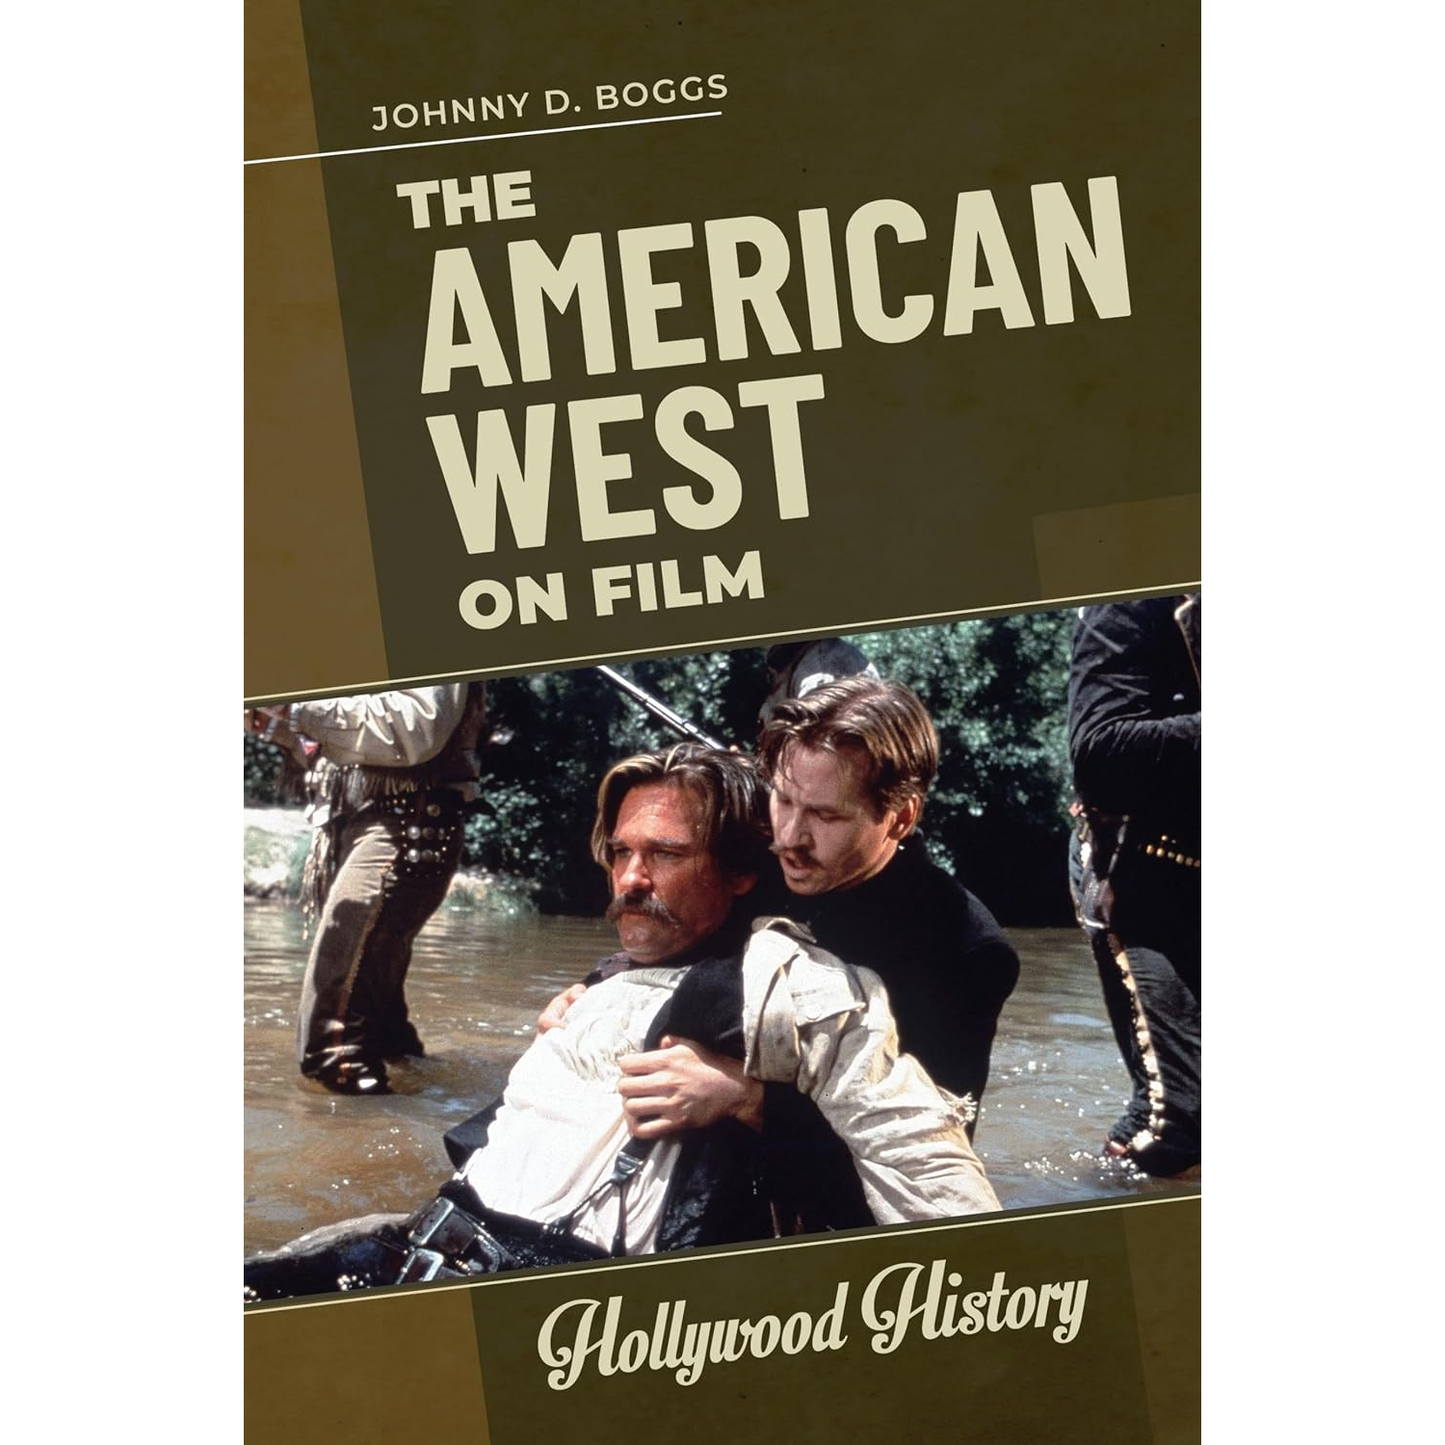 The American West on Film: Hollywood History by Johnny D. Boggs